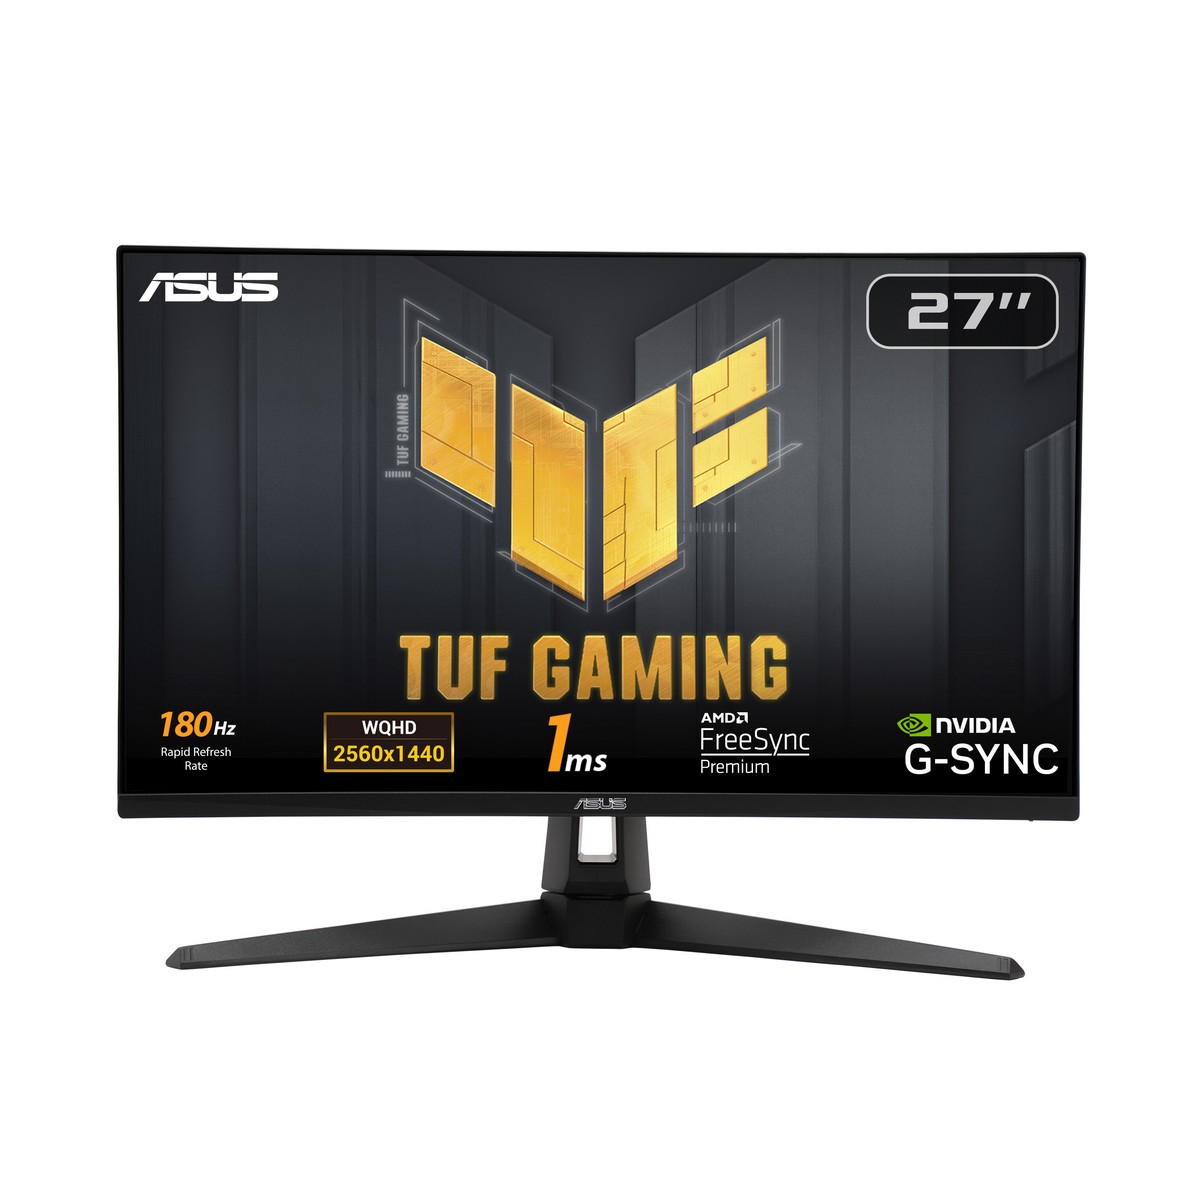 ASUS 27" VG27AQ3A 2560x1440 IPS 180Hz A-Sync Widescreen Gaming Monitor